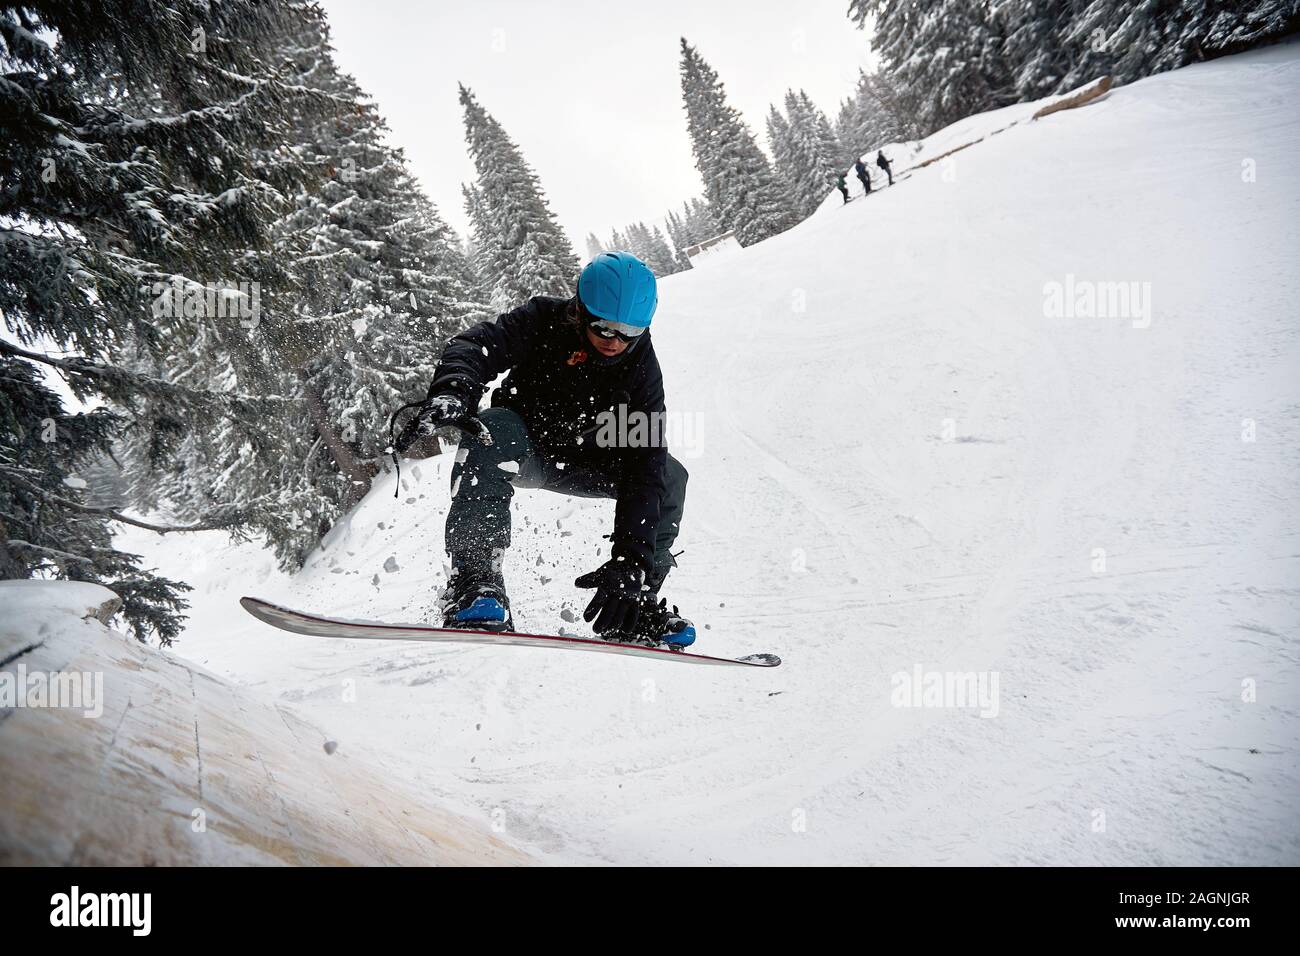 snowboarder in jump.Winter extreme sport. Stock Photo